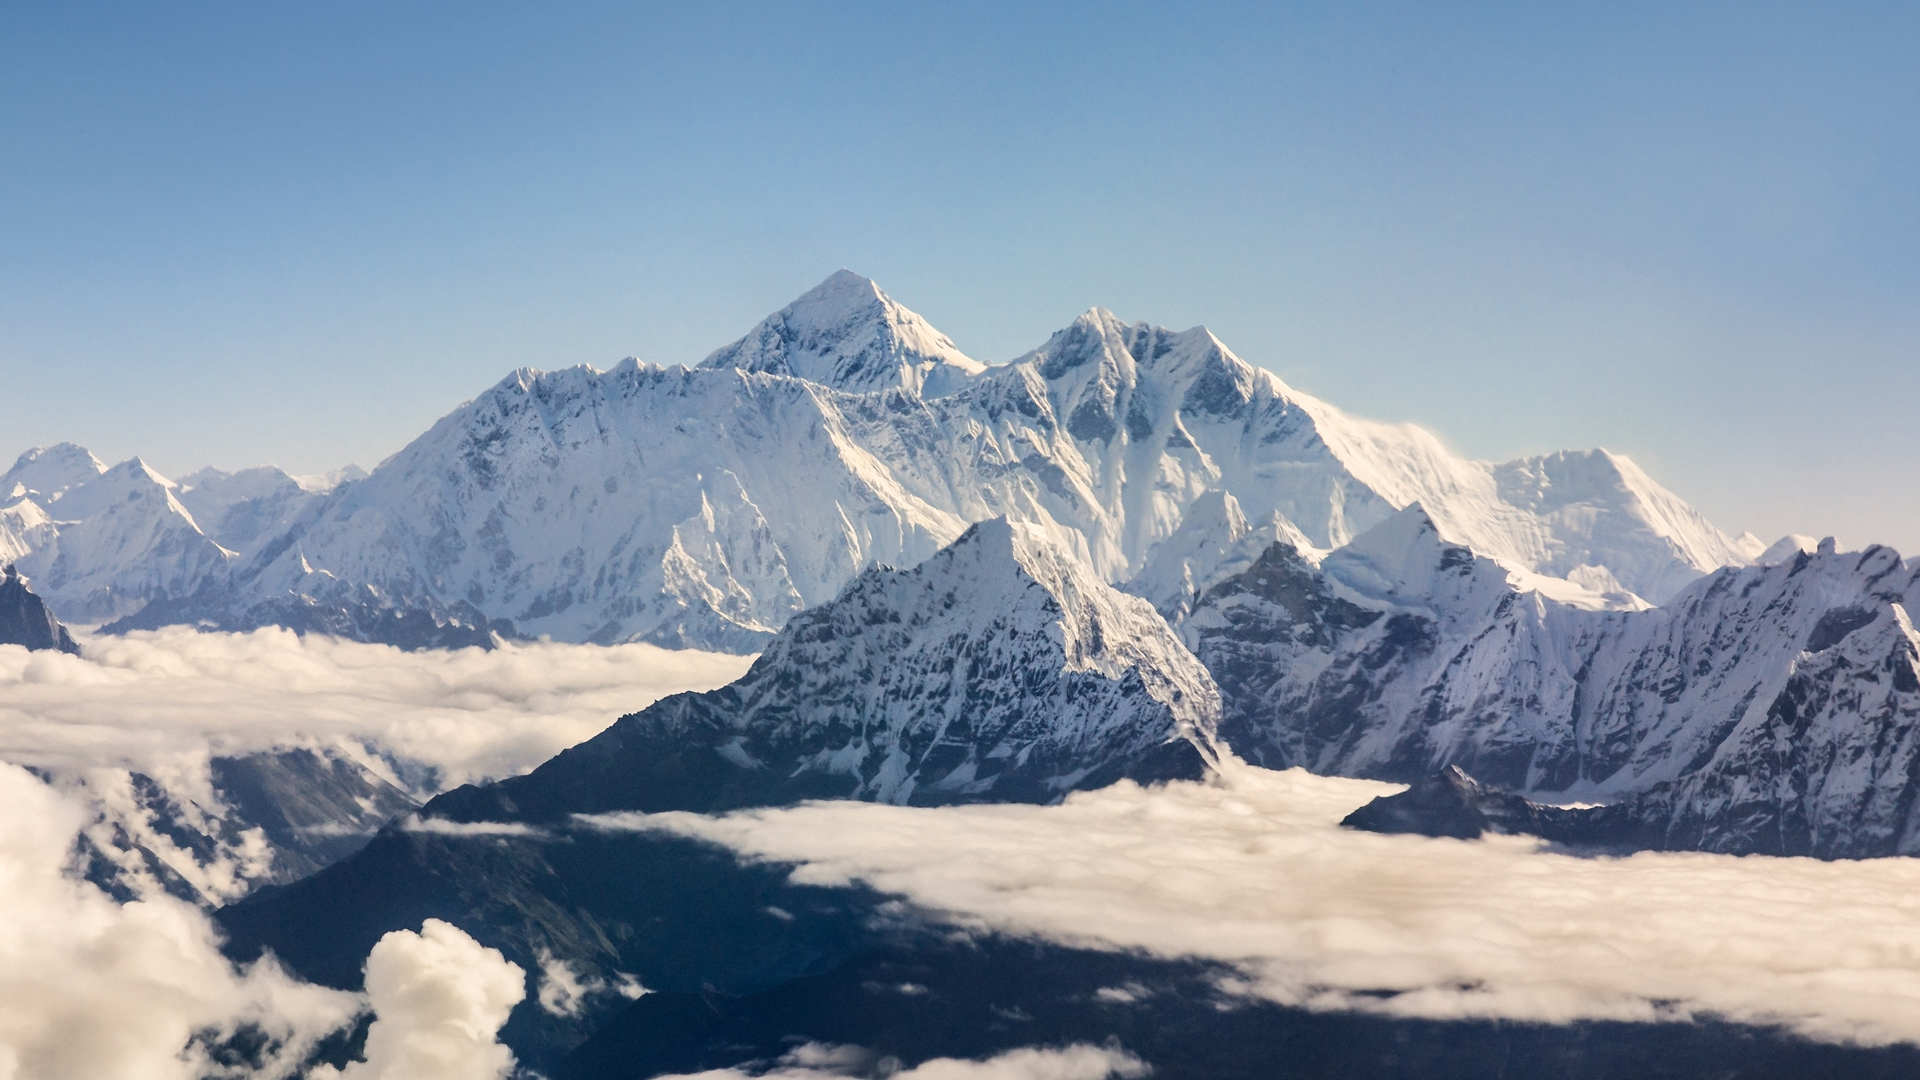 Climate change impacts observed on Mount Everest